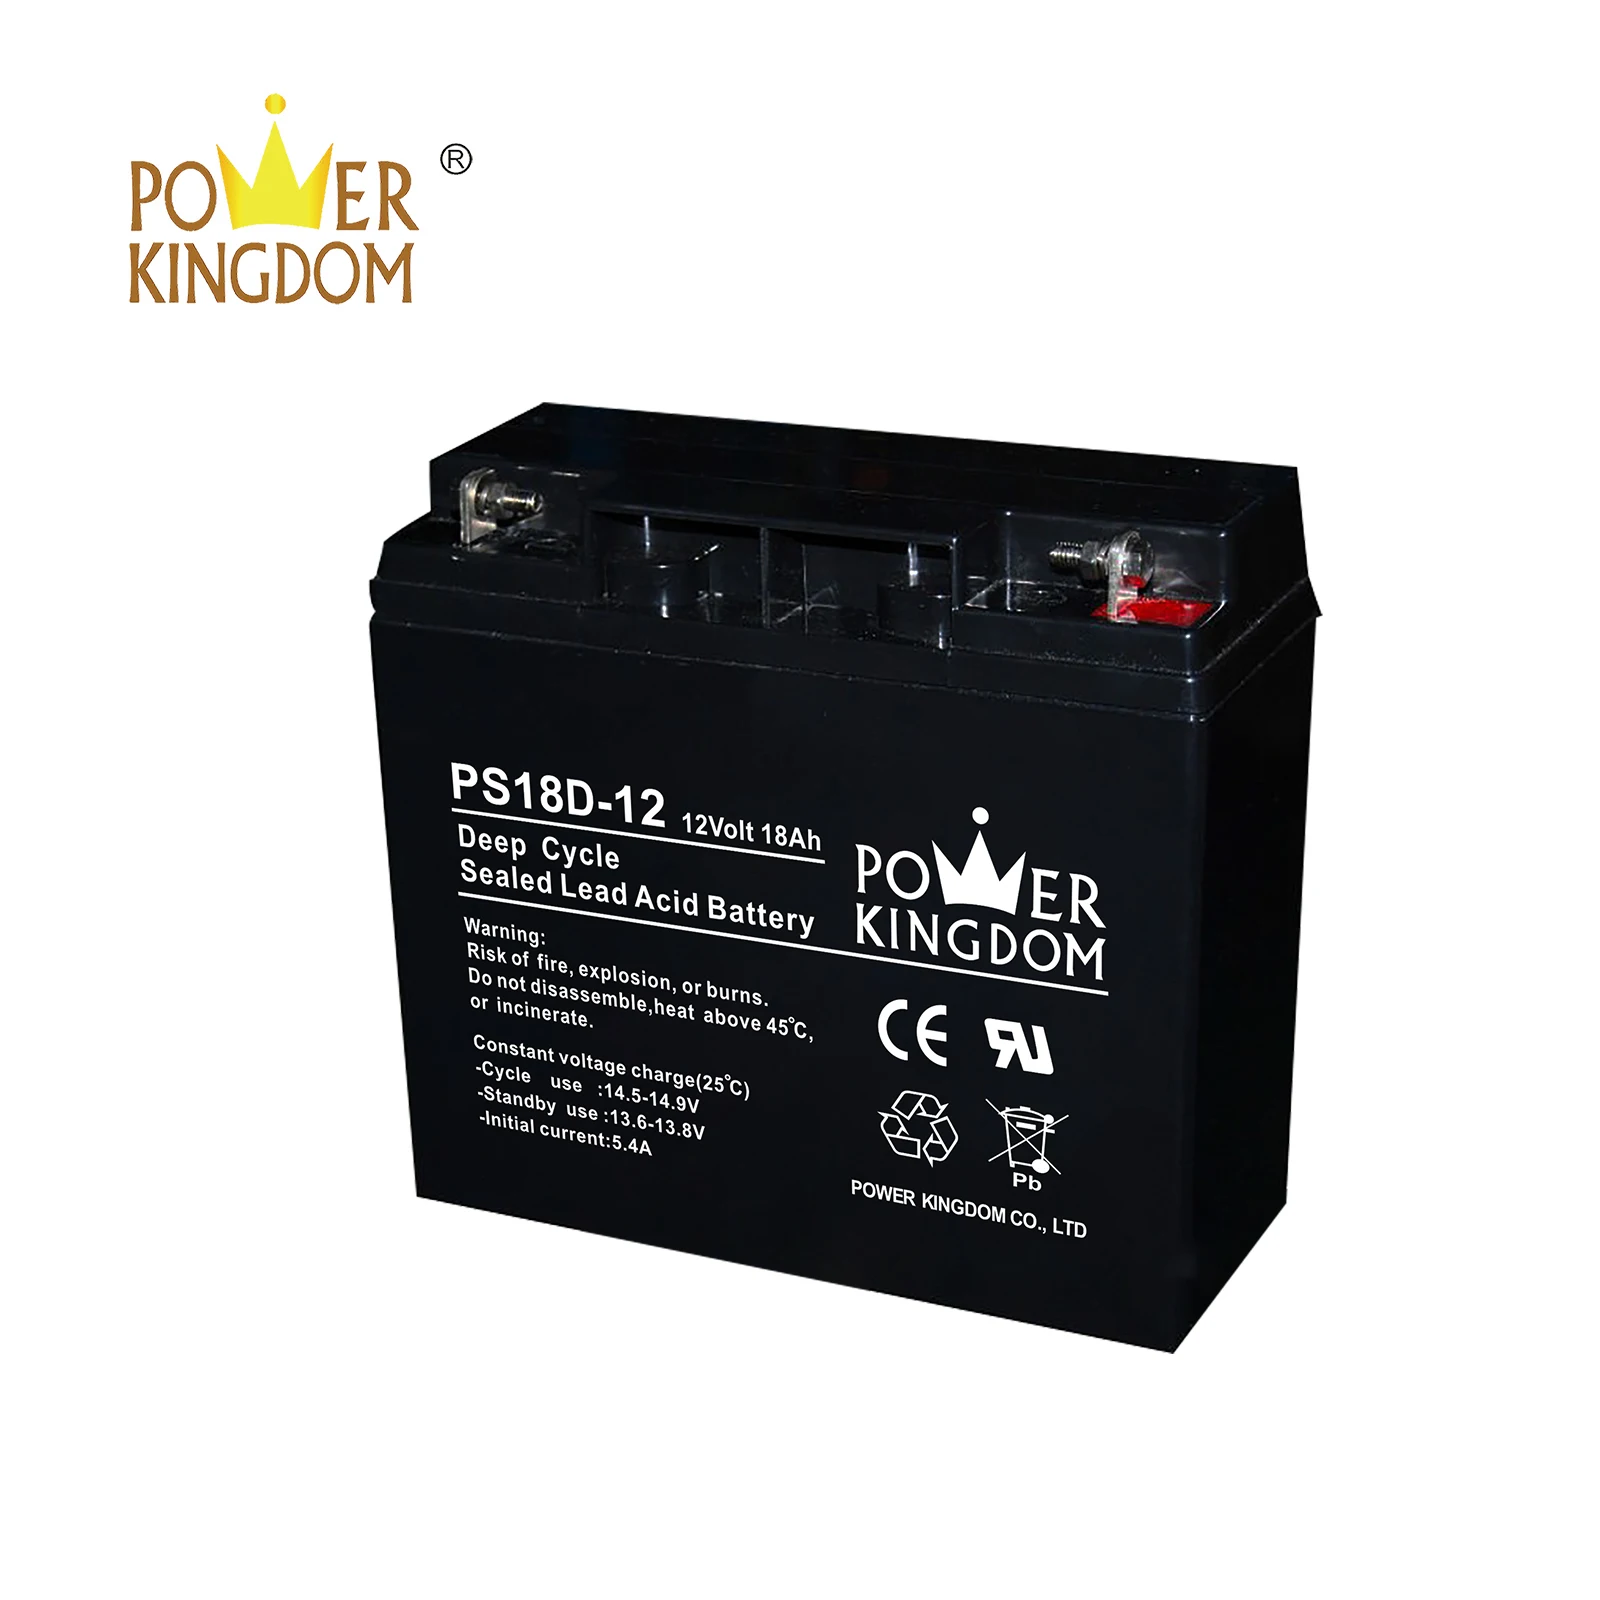 Power Kingdom Best 6 volt gel cell deep cycle battery factory